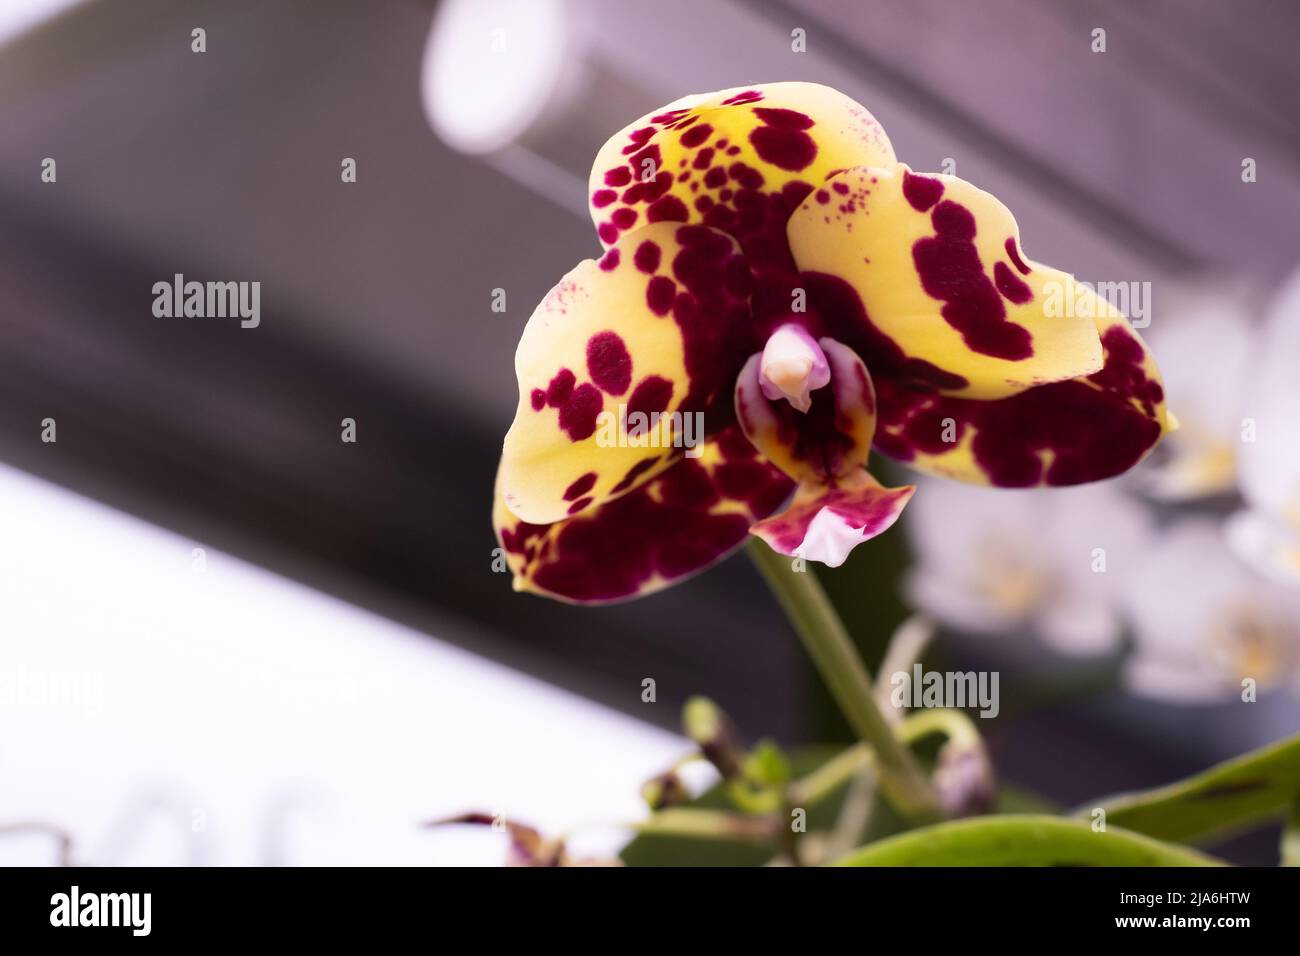 Phalaenopsis orchid bud close-up. Orchids background. A rare beautiful sight. Botany plant in greenhouse. Spotted burgundy purple lilac yellow bud. Stock Photo